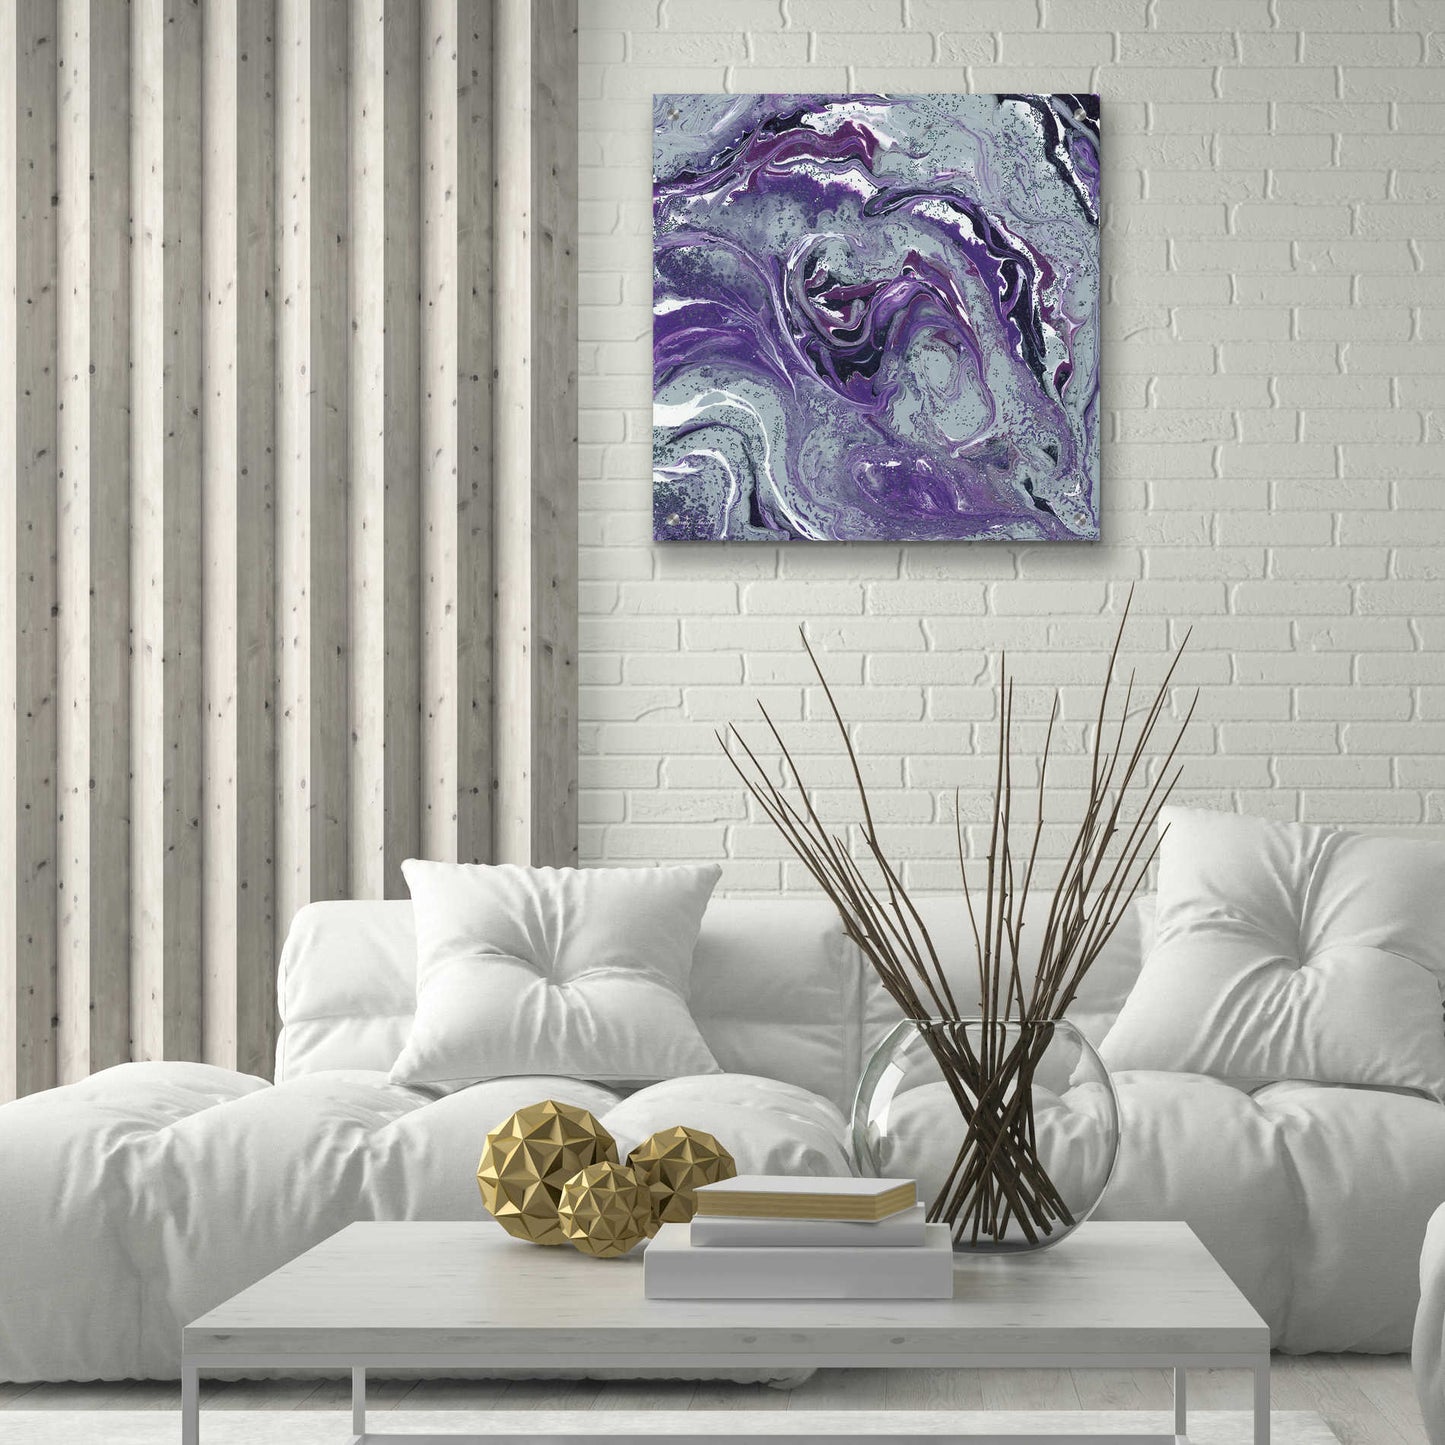 Epic Art 'Abstract in Purple I' by Cindy Jacobs, Acrylic Glass Wall Art,24x24